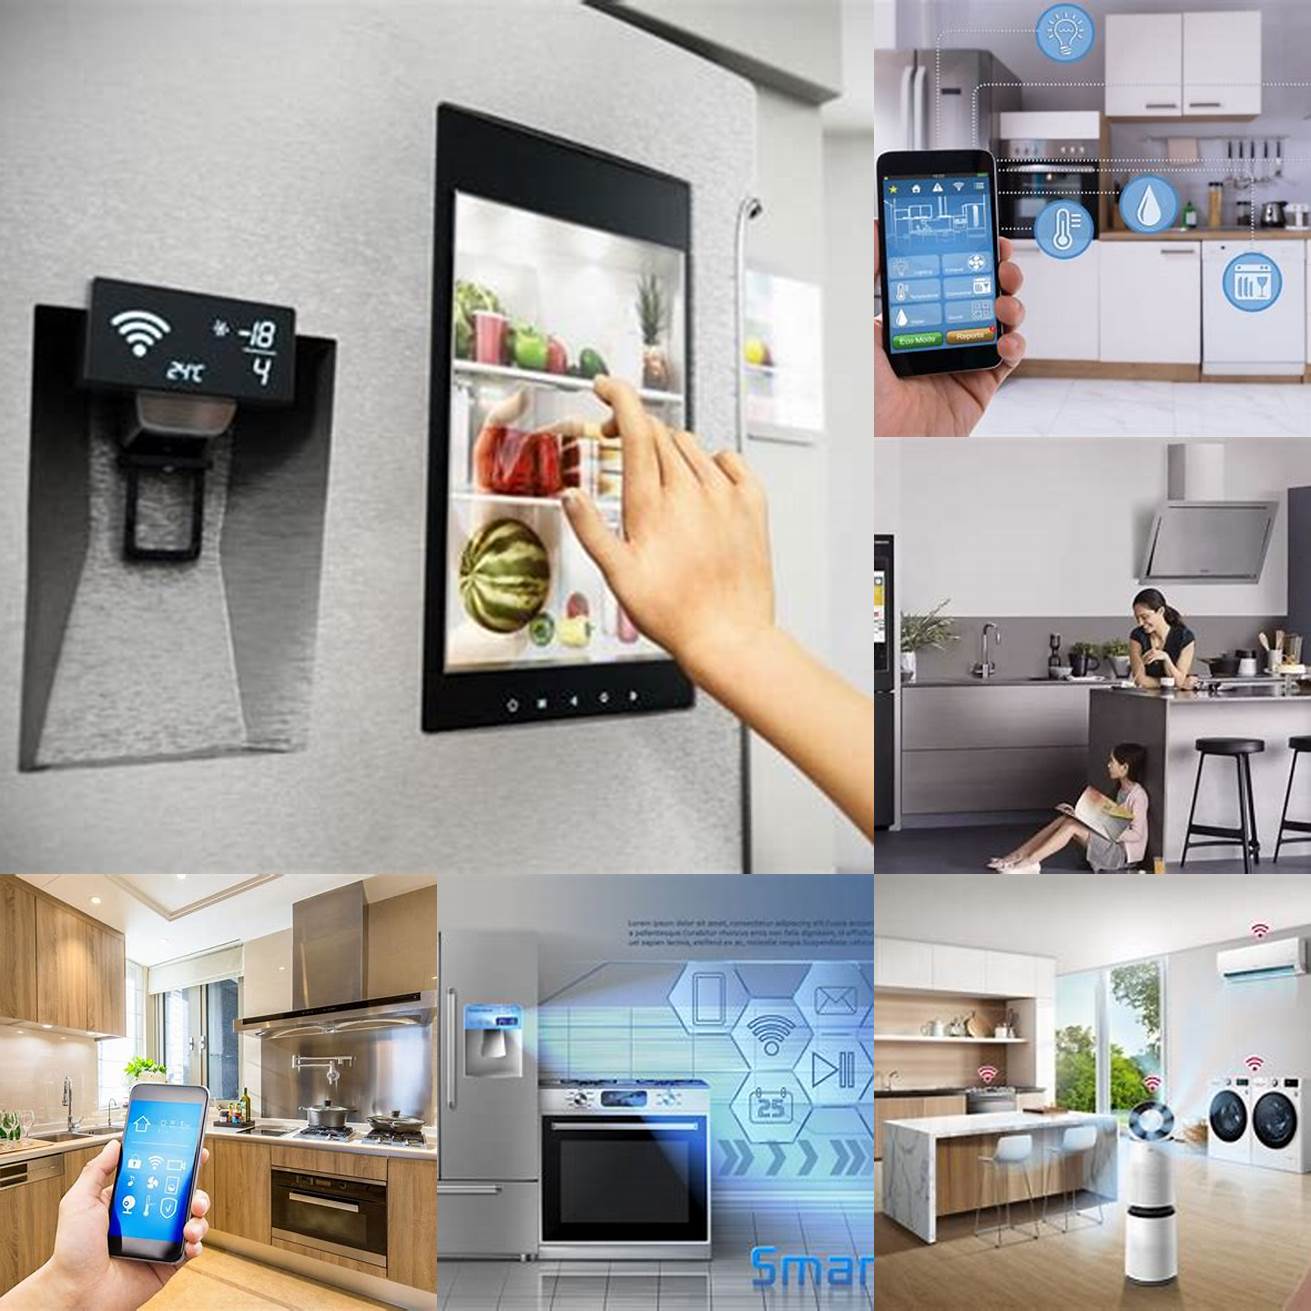 High-tech appliances with smart features